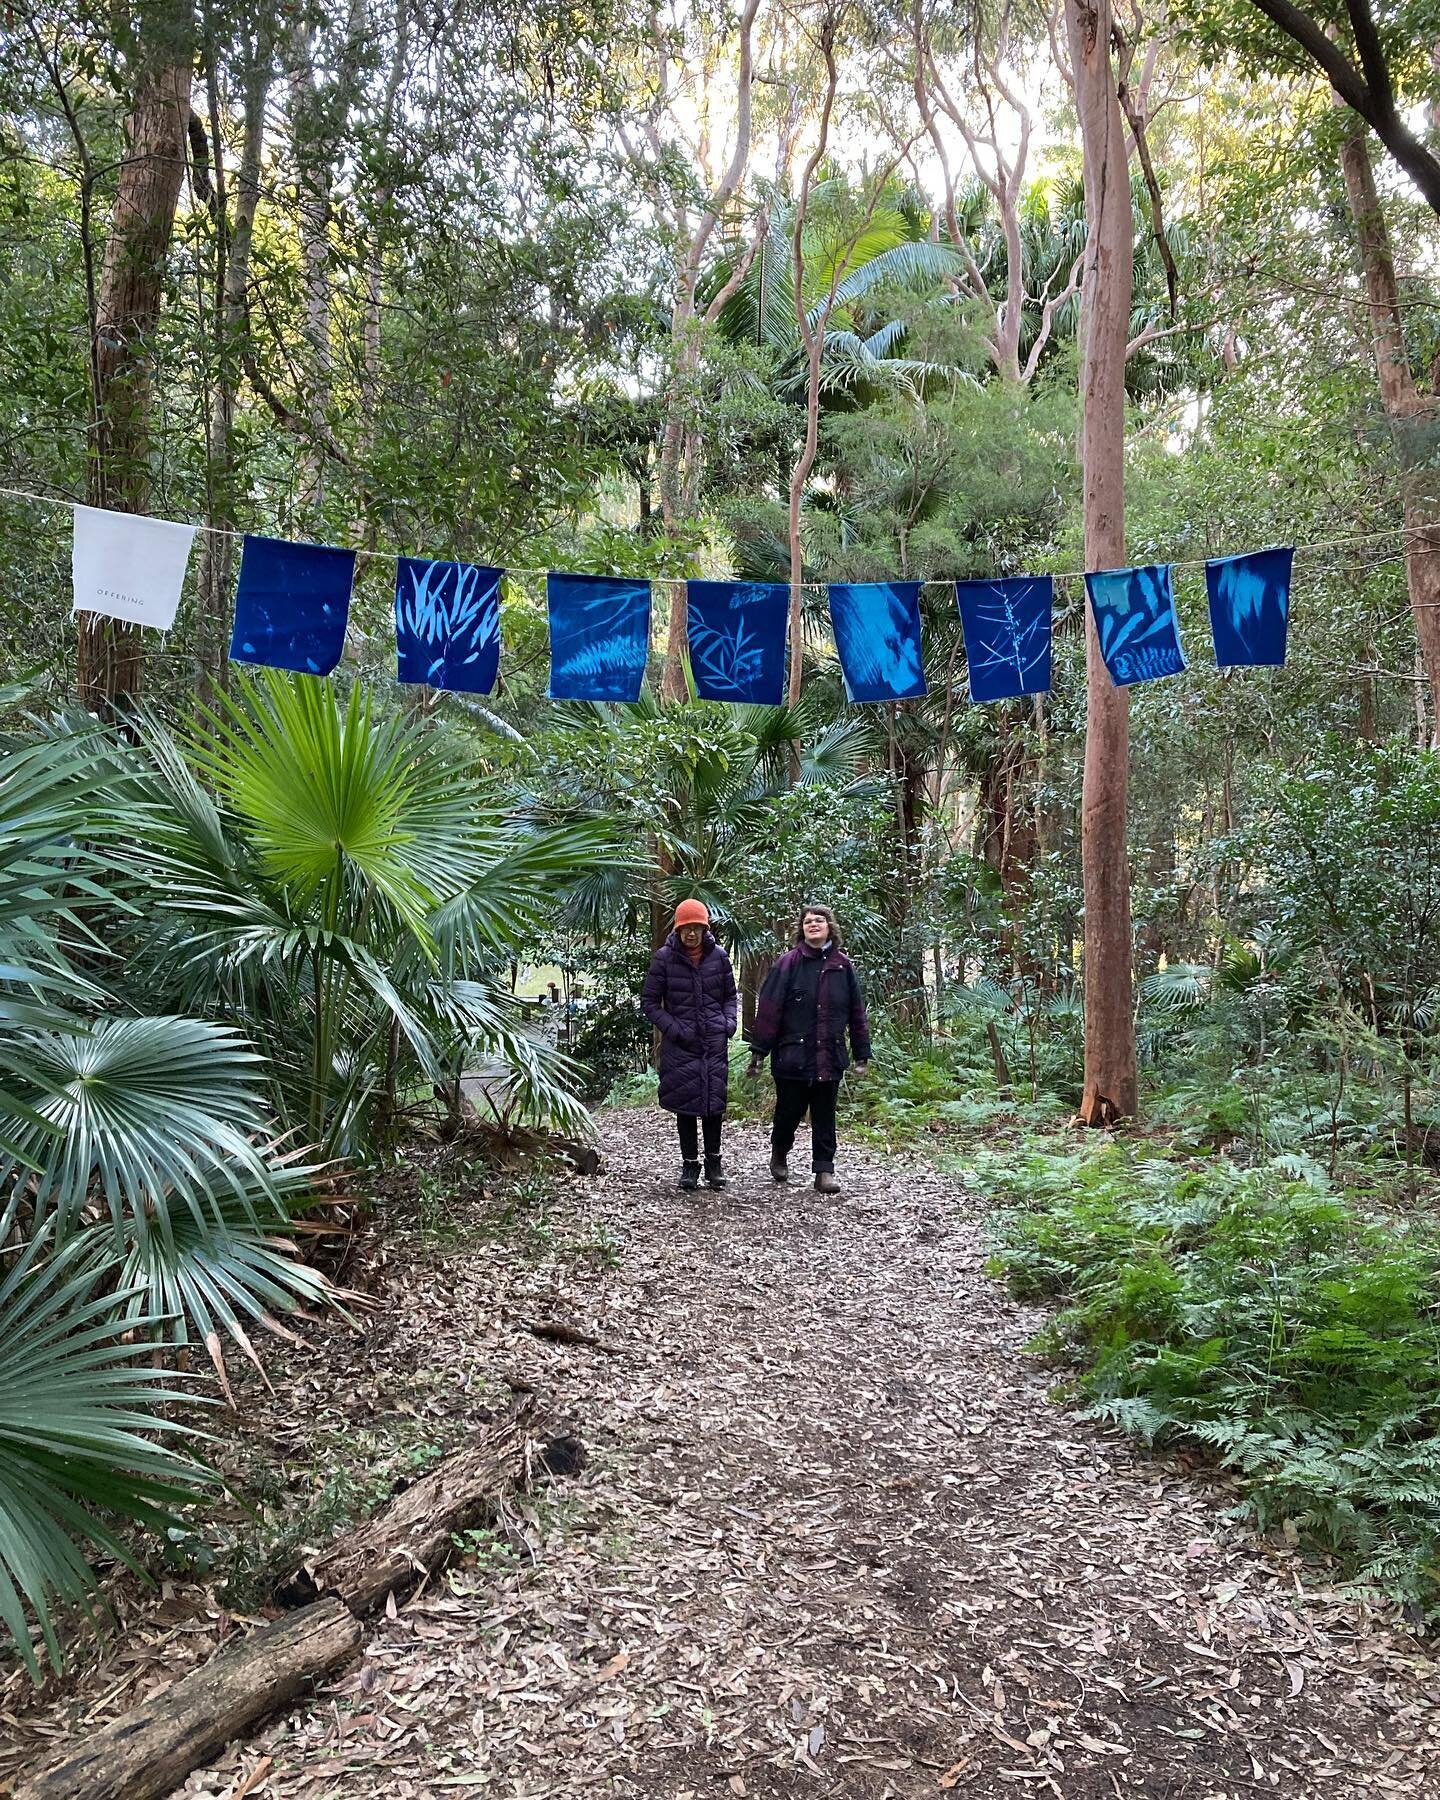 Our community cyanotype installation is still intact and available to view until this Saturday as part of the Pearl Beach Ephemeral Art Trail 🕸

Most of the artworks have help up amazingly given recent floods and wild winds. 

It&rsquo;s a good scho